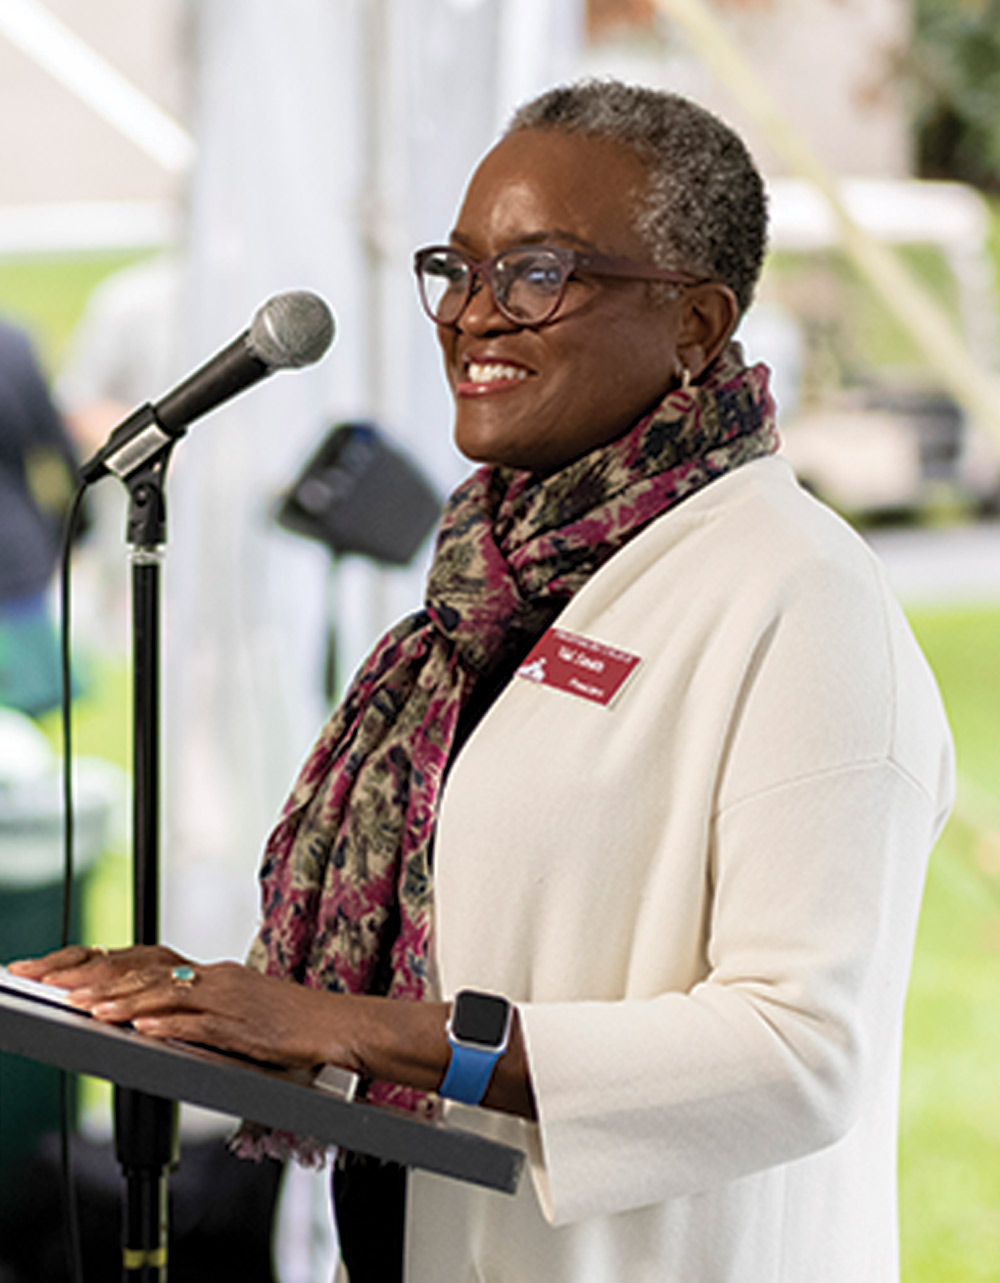 President Valerie Smith, smiling at a lectern and wearing a white sweater and scarf